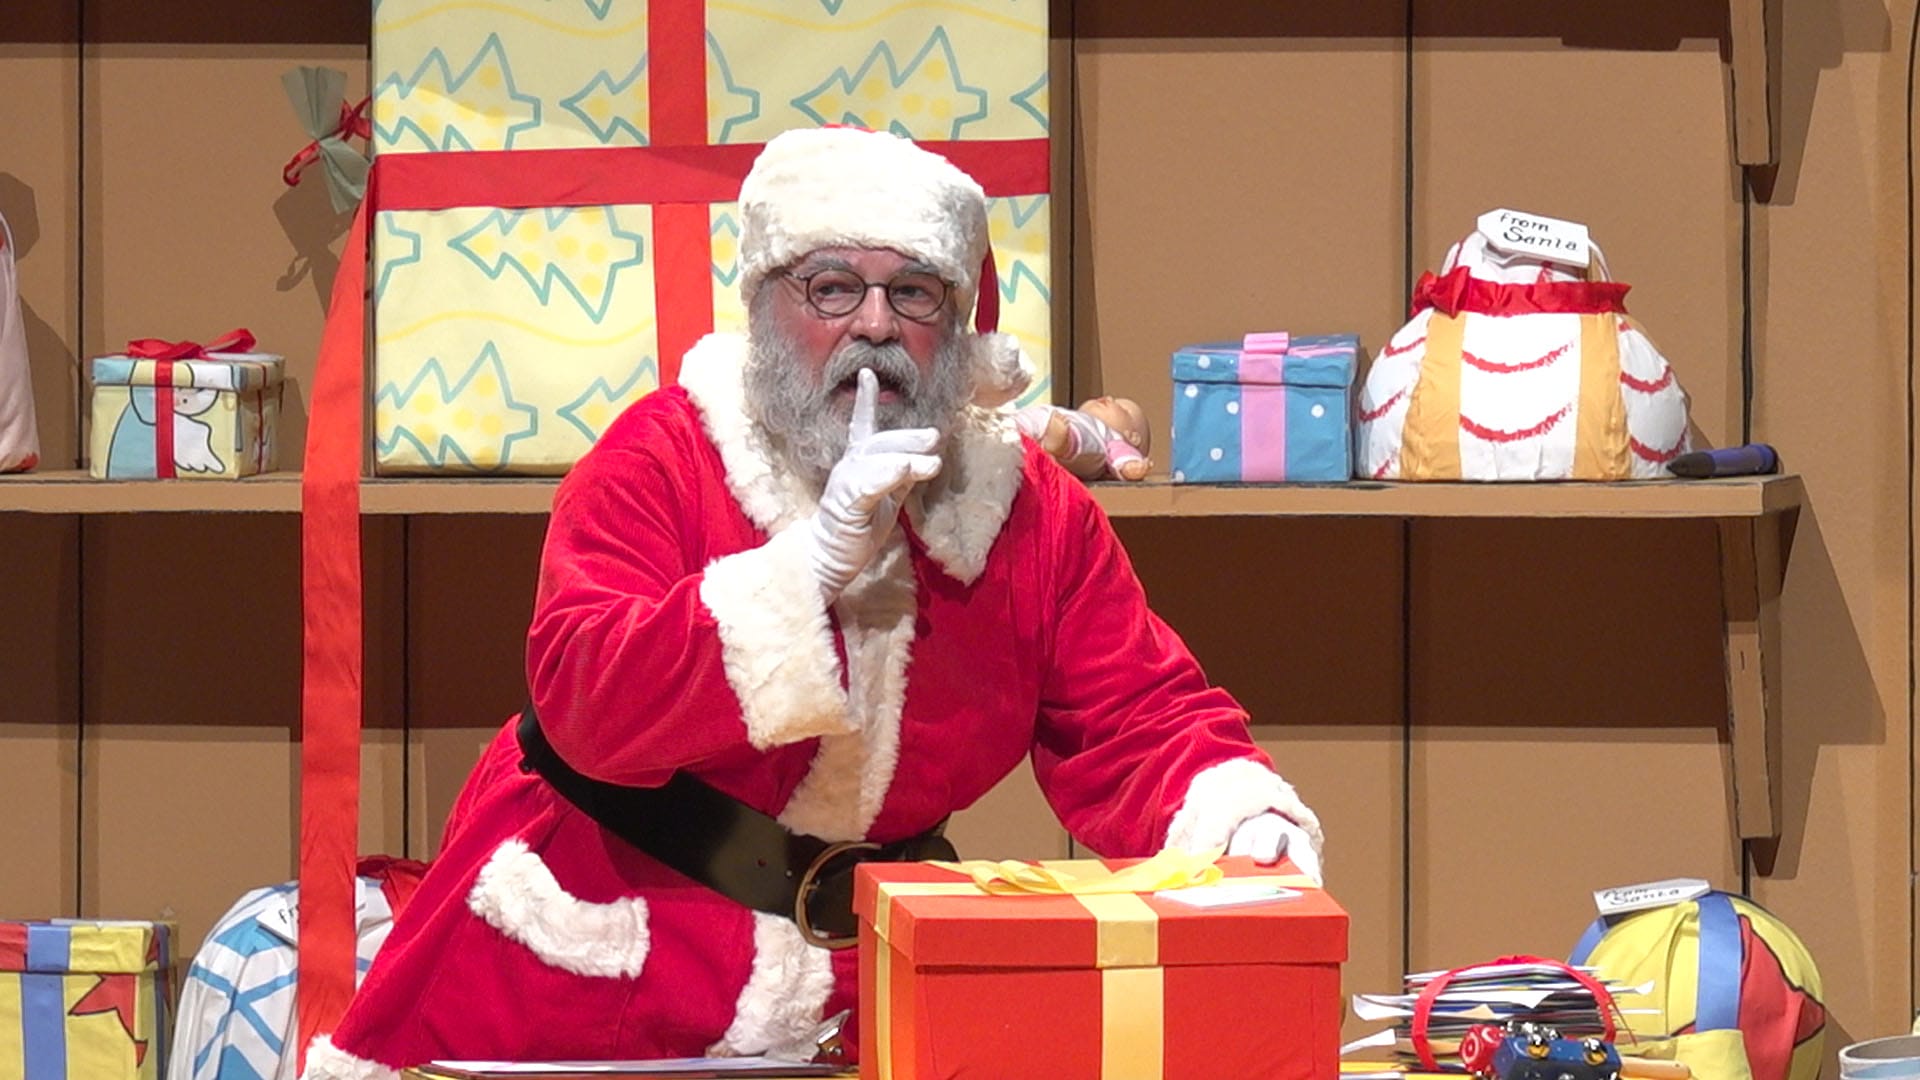 Santa does a 'shhh' sign with his hands while holding a present